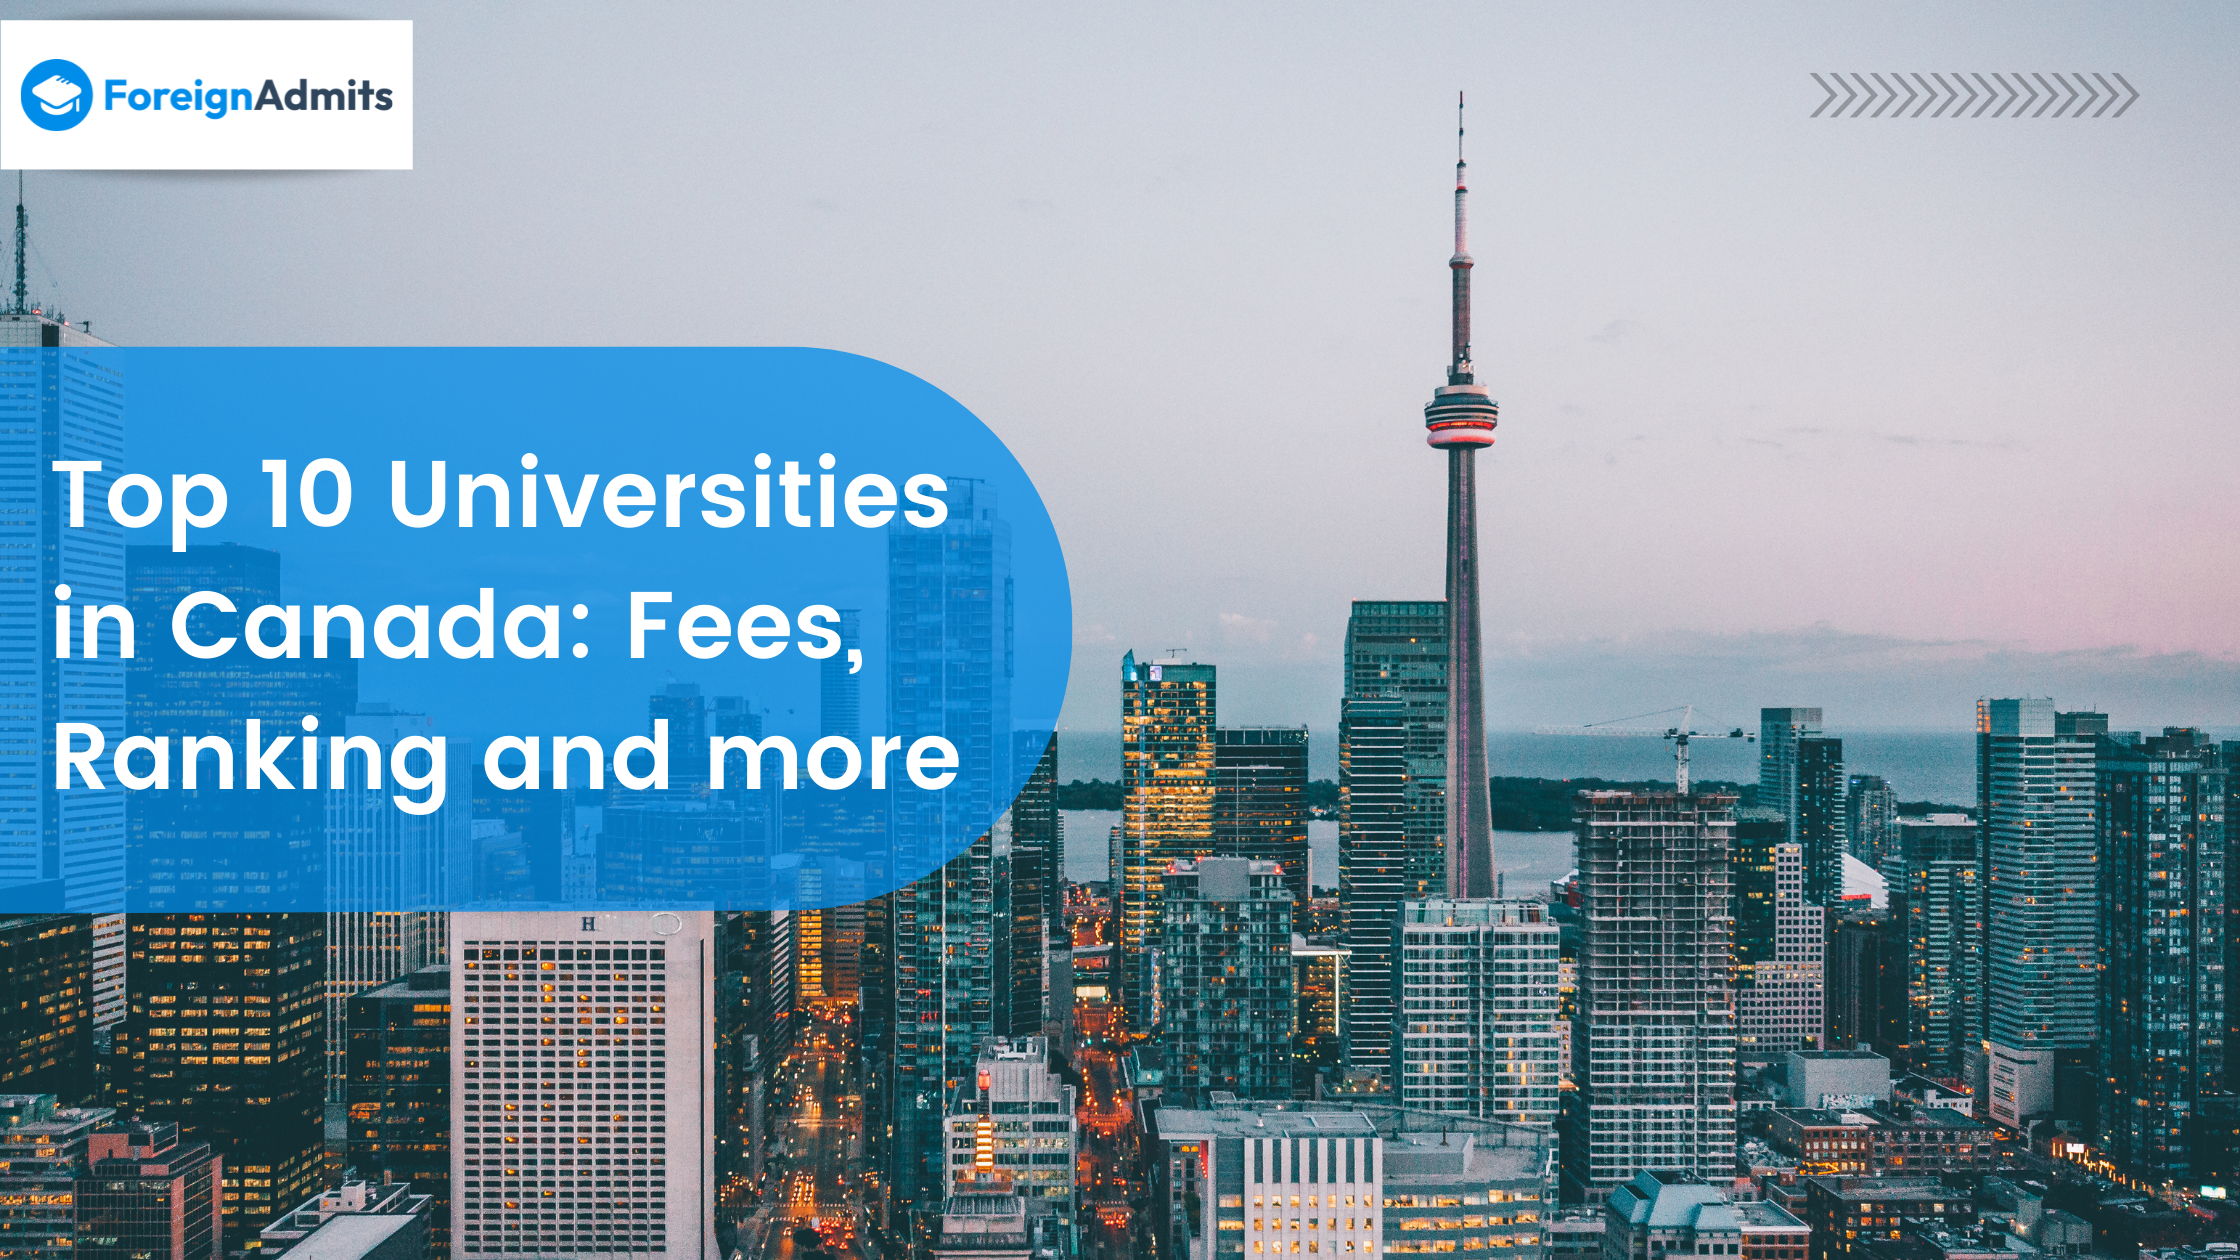 Top 10 Universities in Canada: Fees, Ranking and more